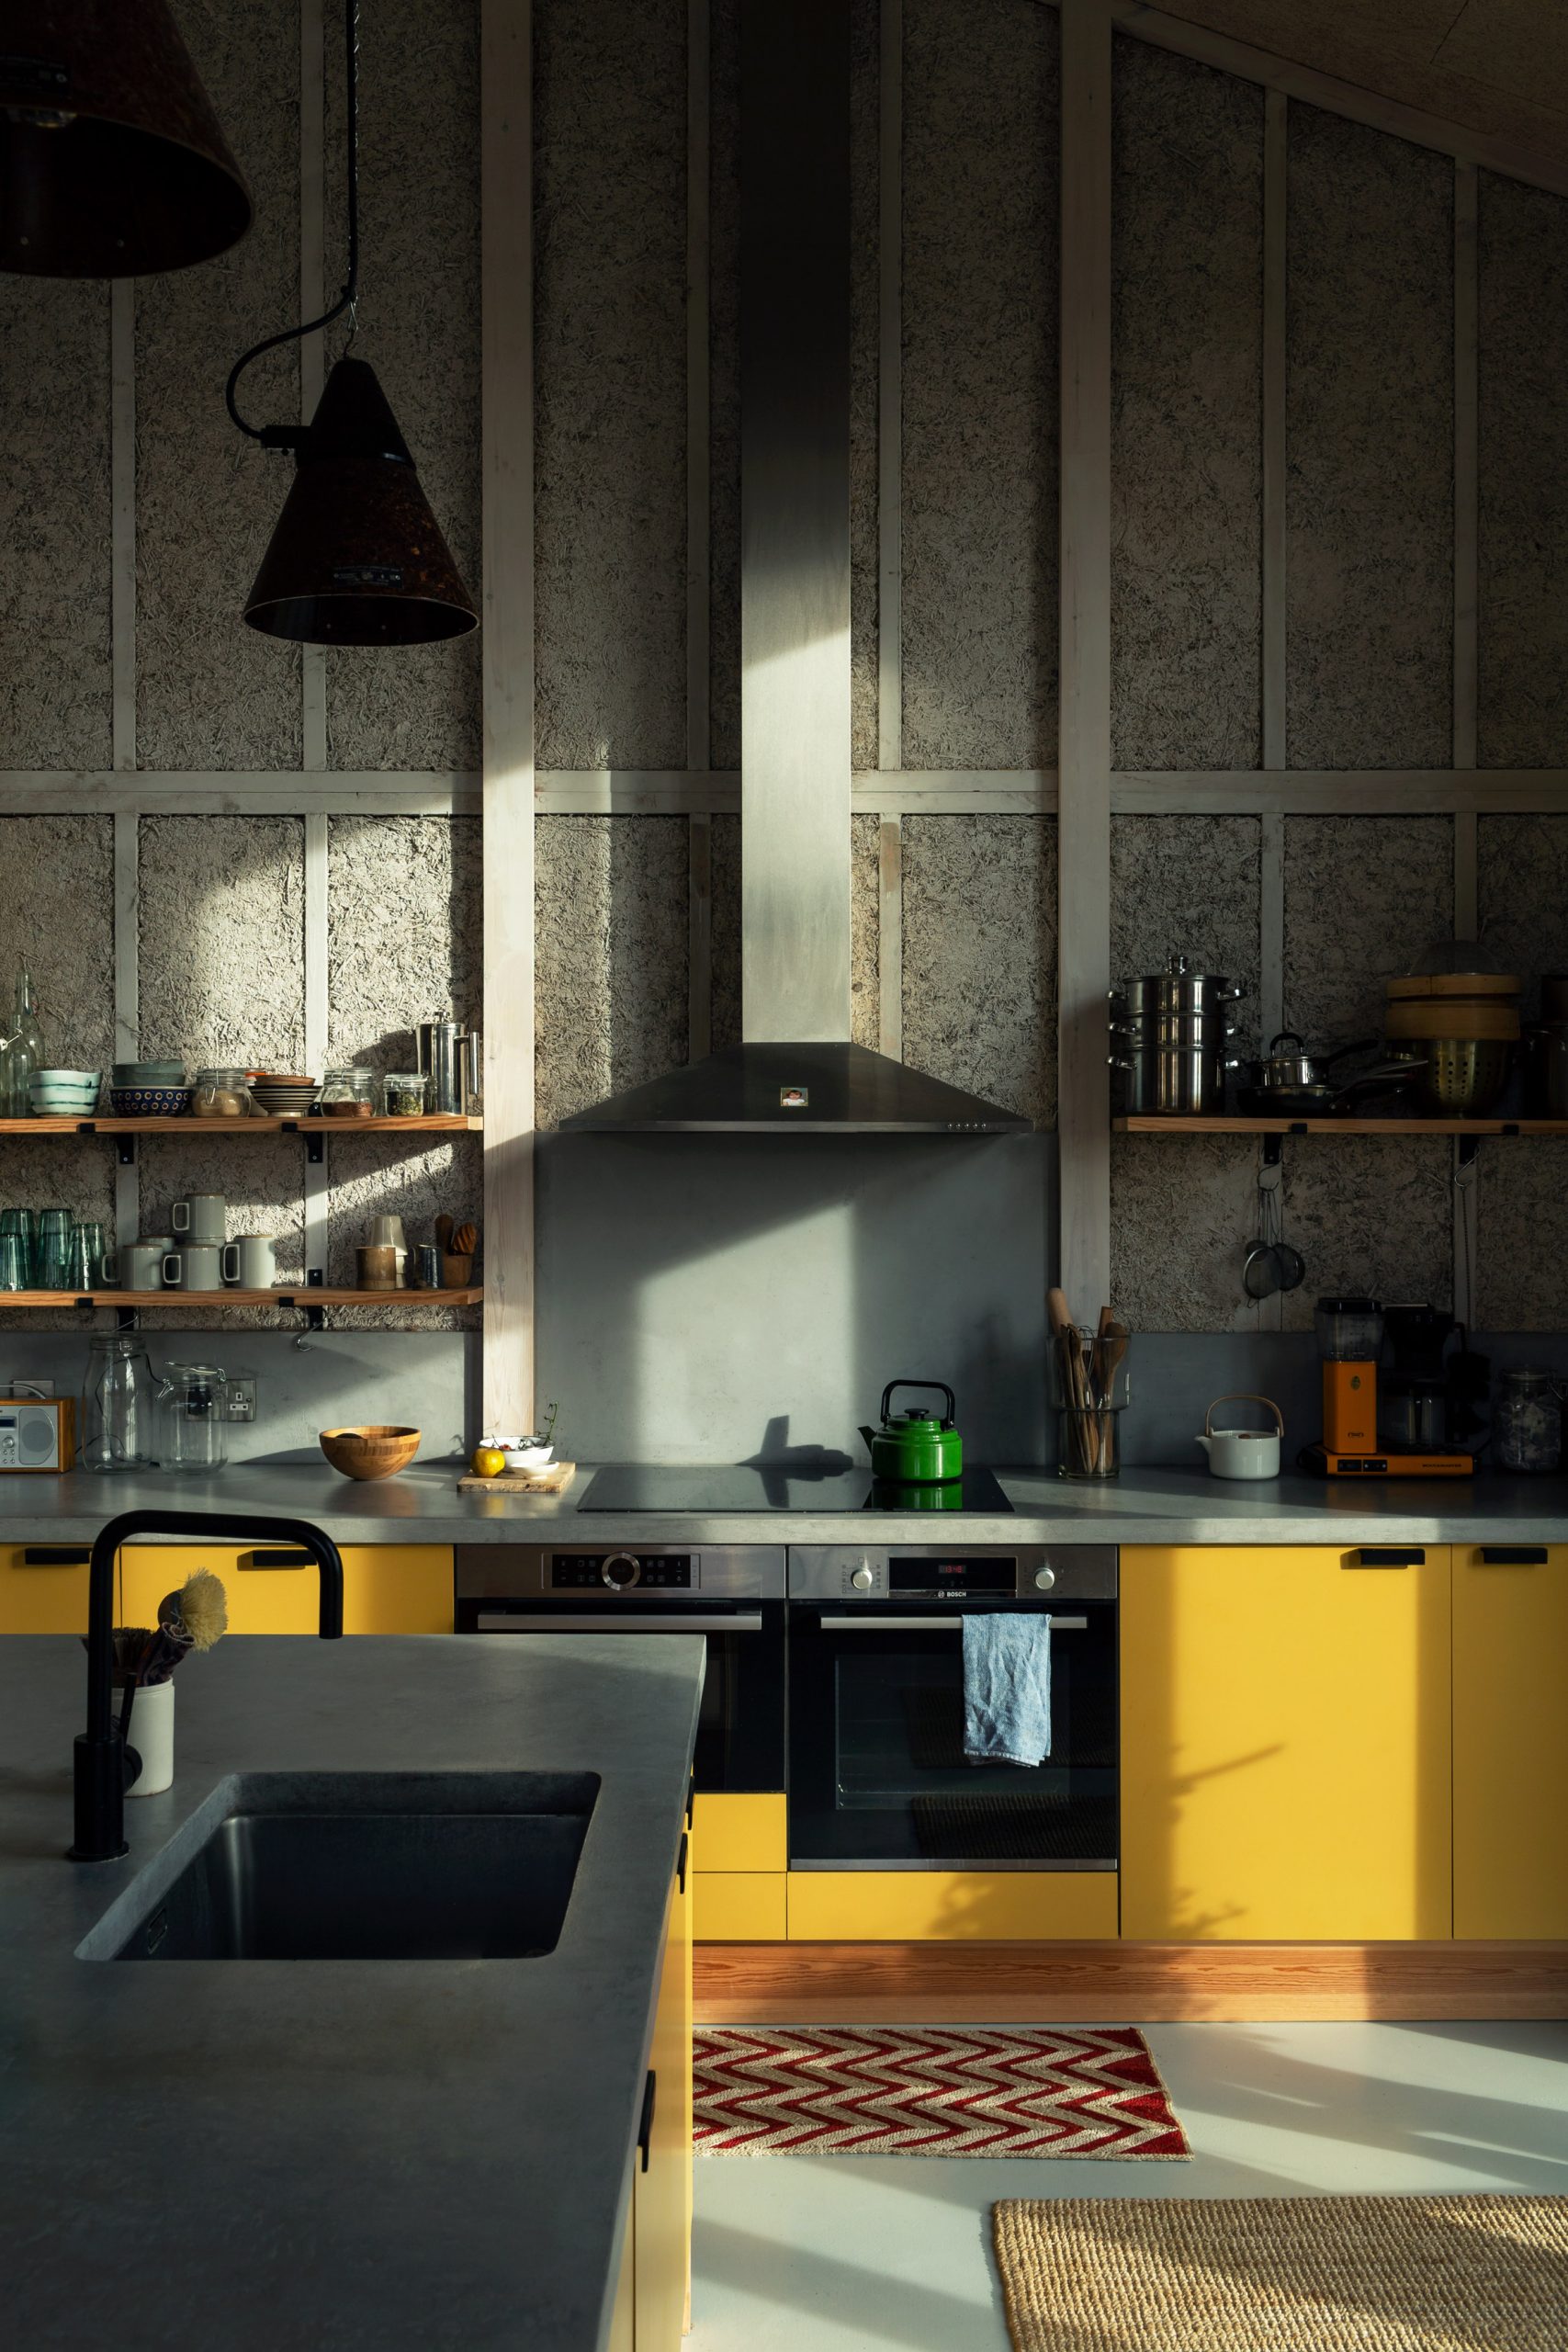 Kitchen with hemp walls and yellow cupboards